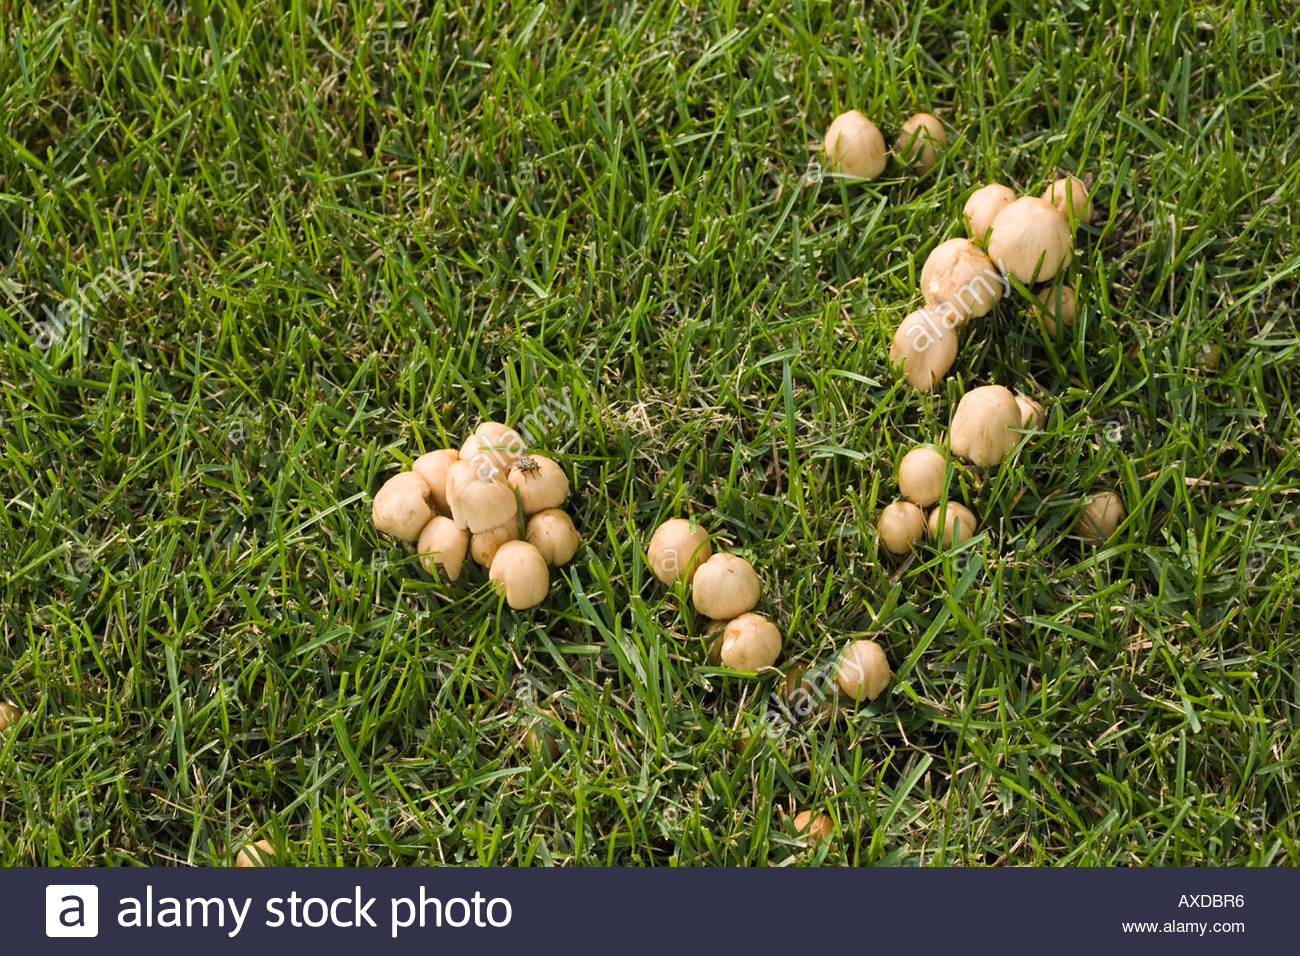 What does fungus in grass look like?